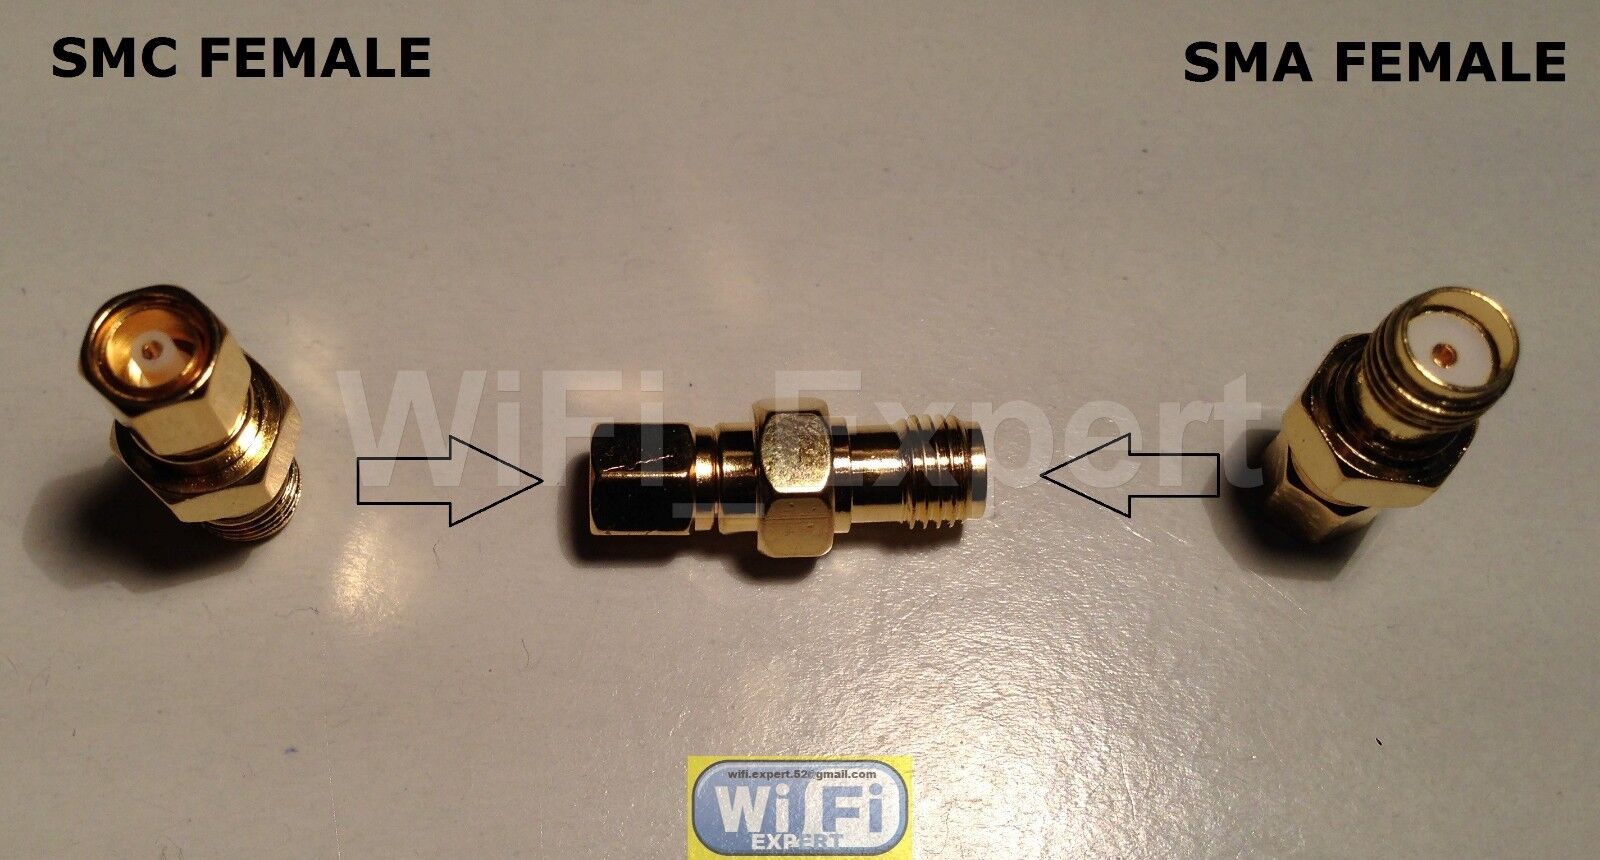 1 x Gold Plated SMC female jack to SMA female jack RF coaxial adapter connector